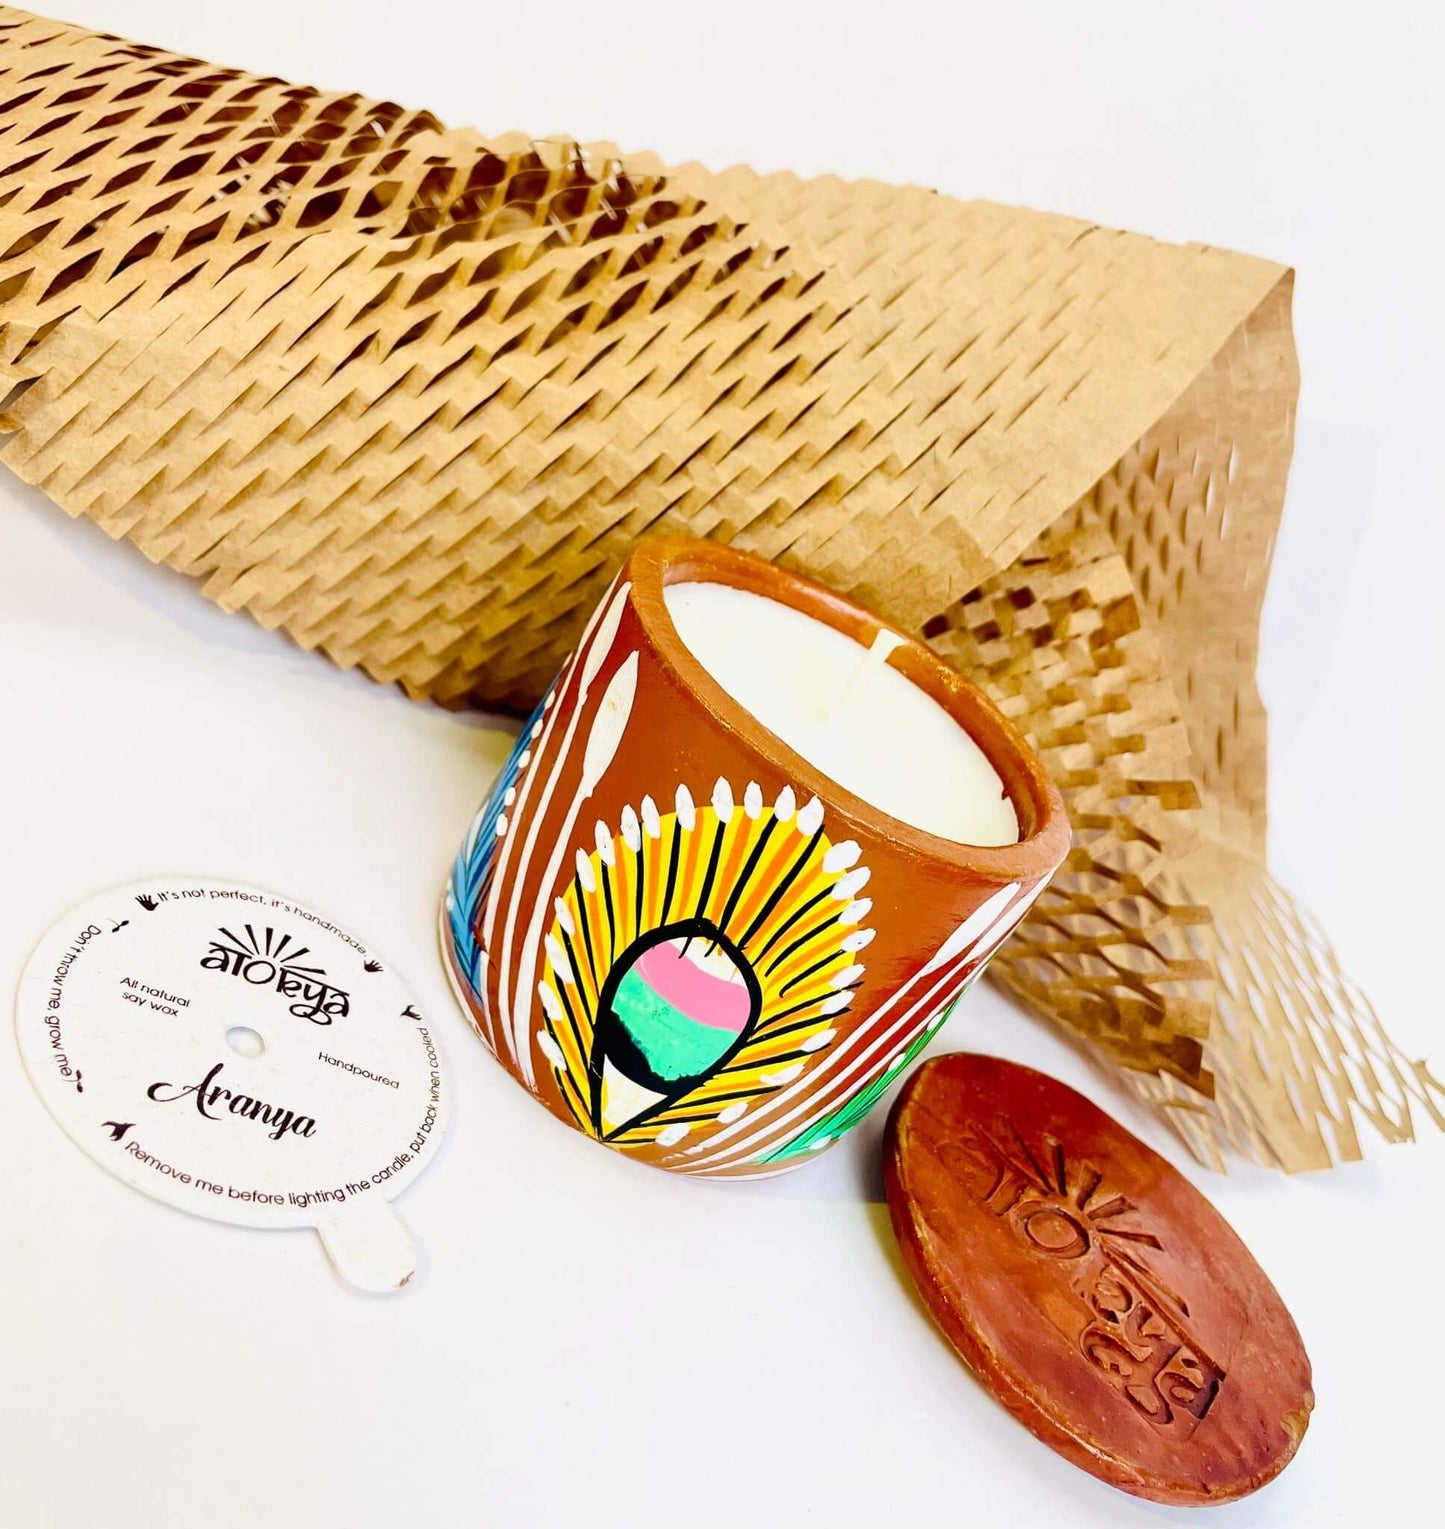 100% natural soy wax scented candle in a terracotta jar hand painted with yellow feathers having a seed paper candle dust cover, honeycomb paper and candle snuffer placed around the candle